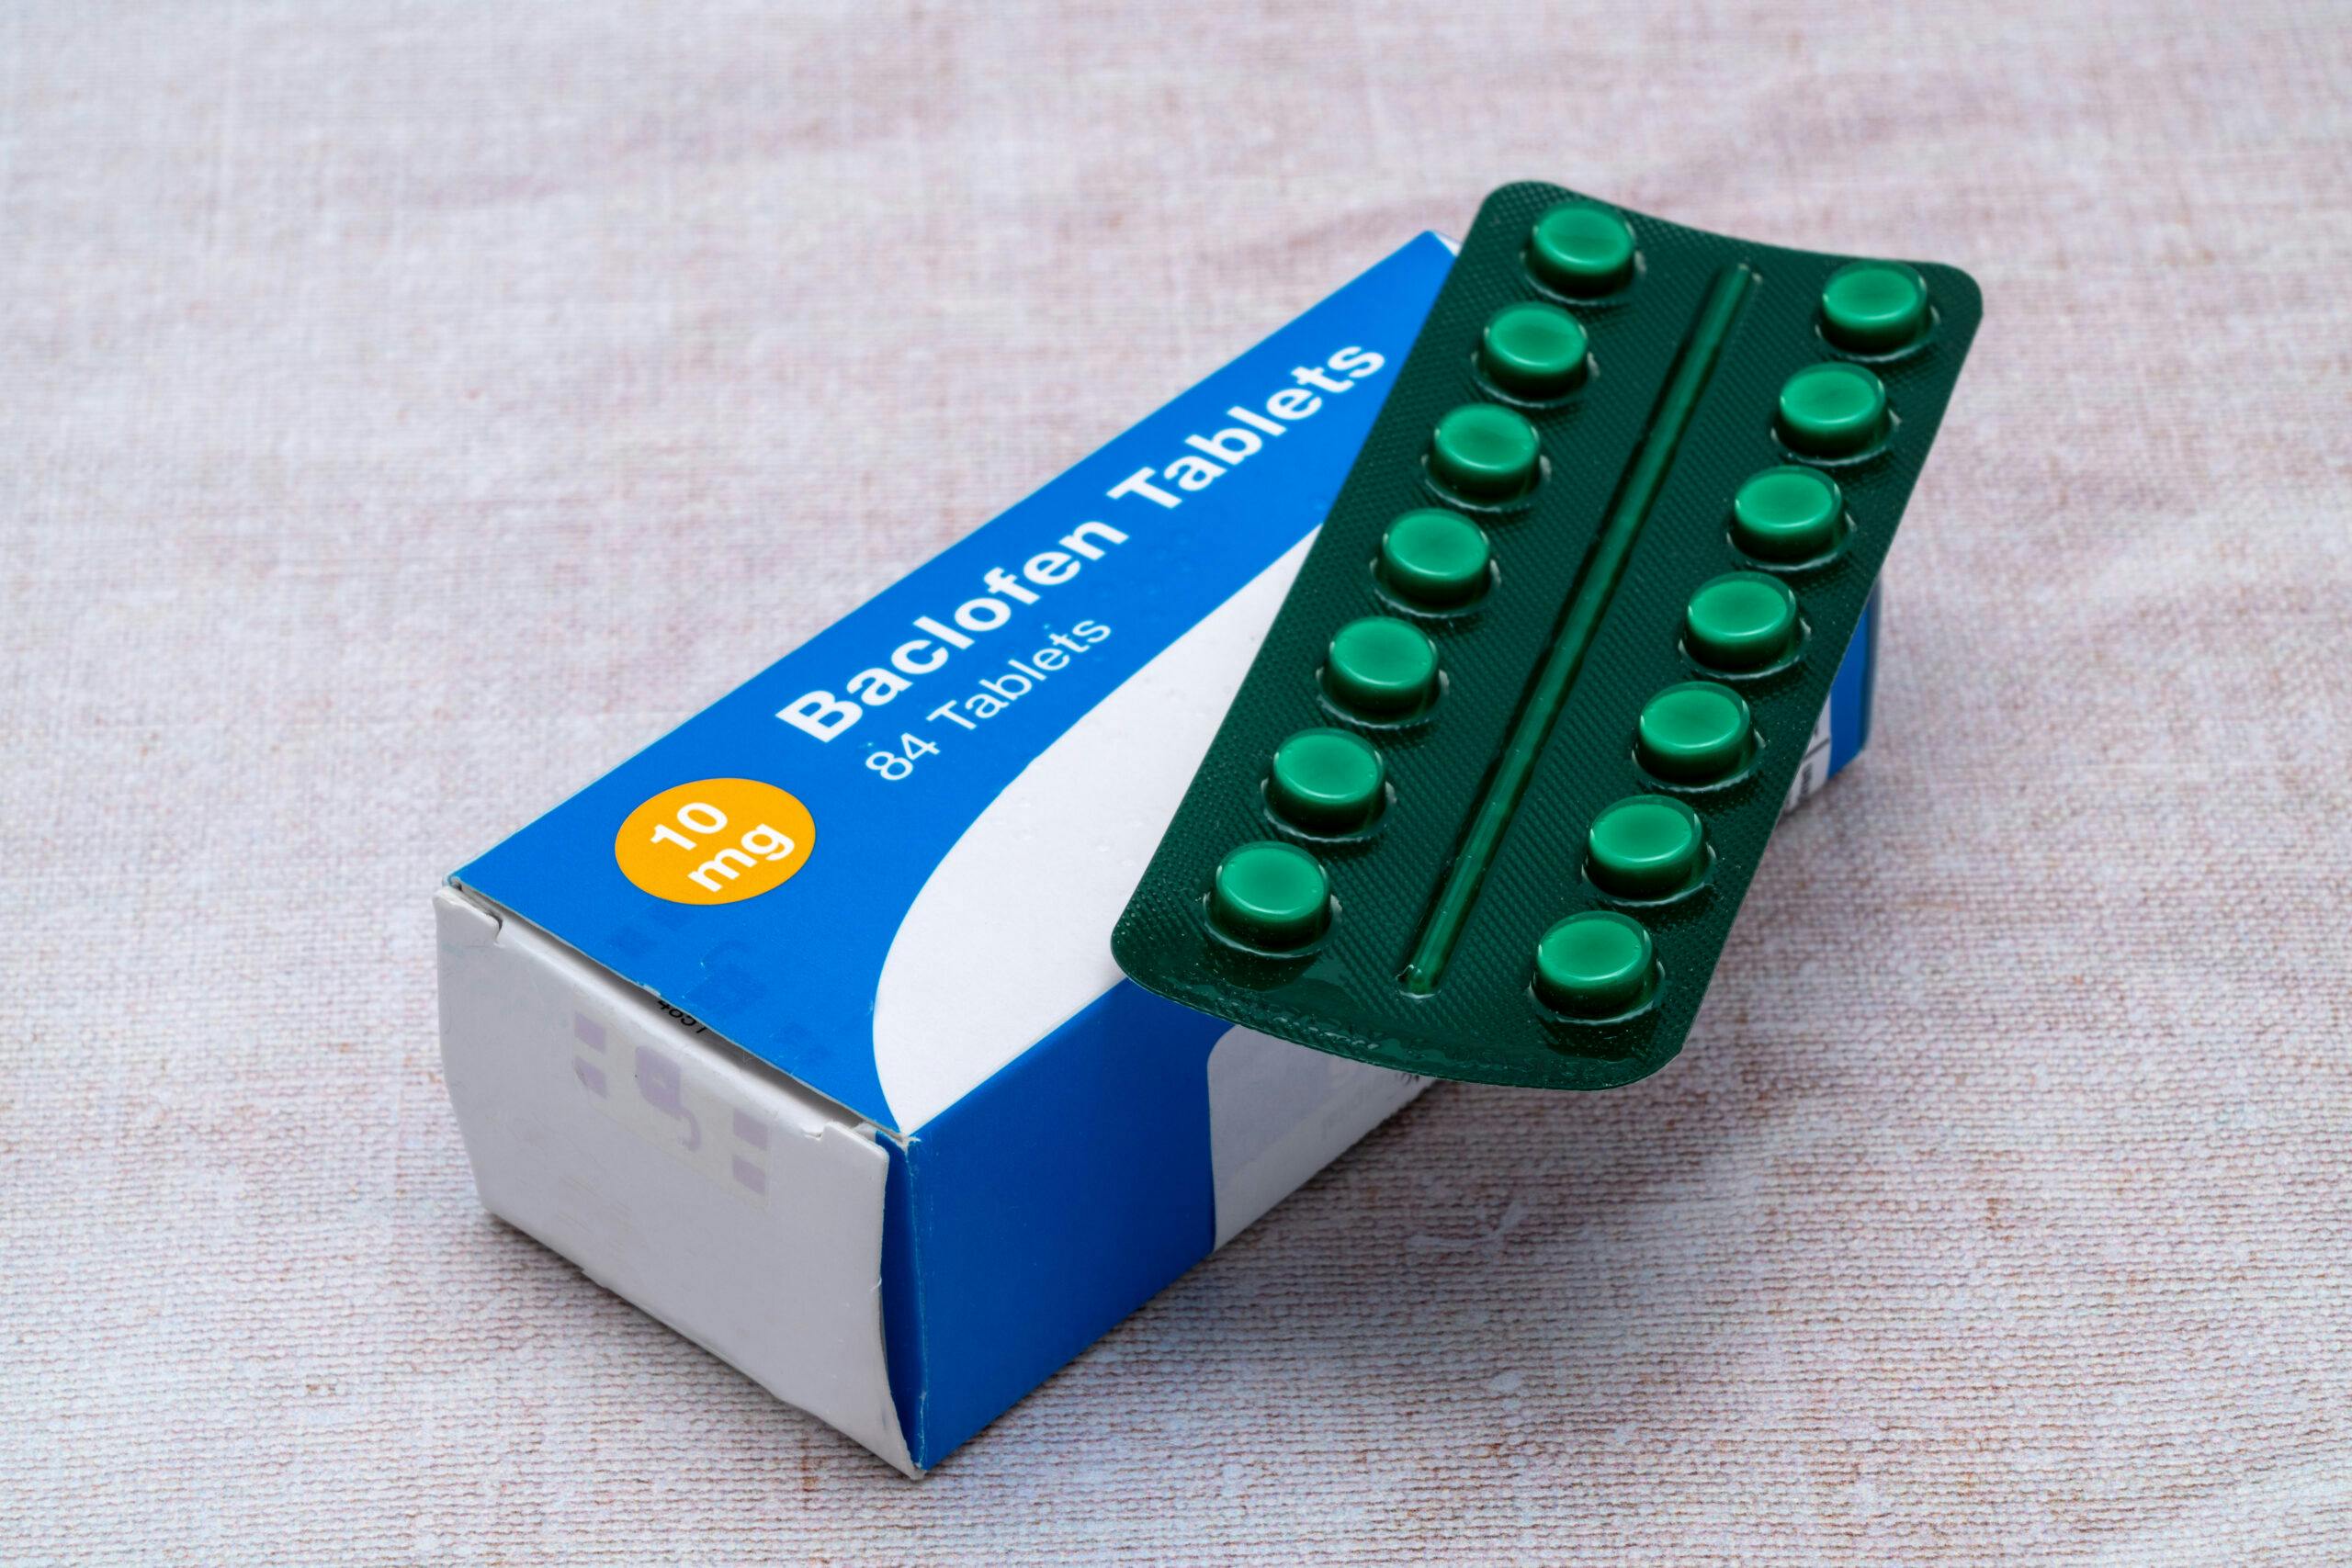 Baclofen pills with box